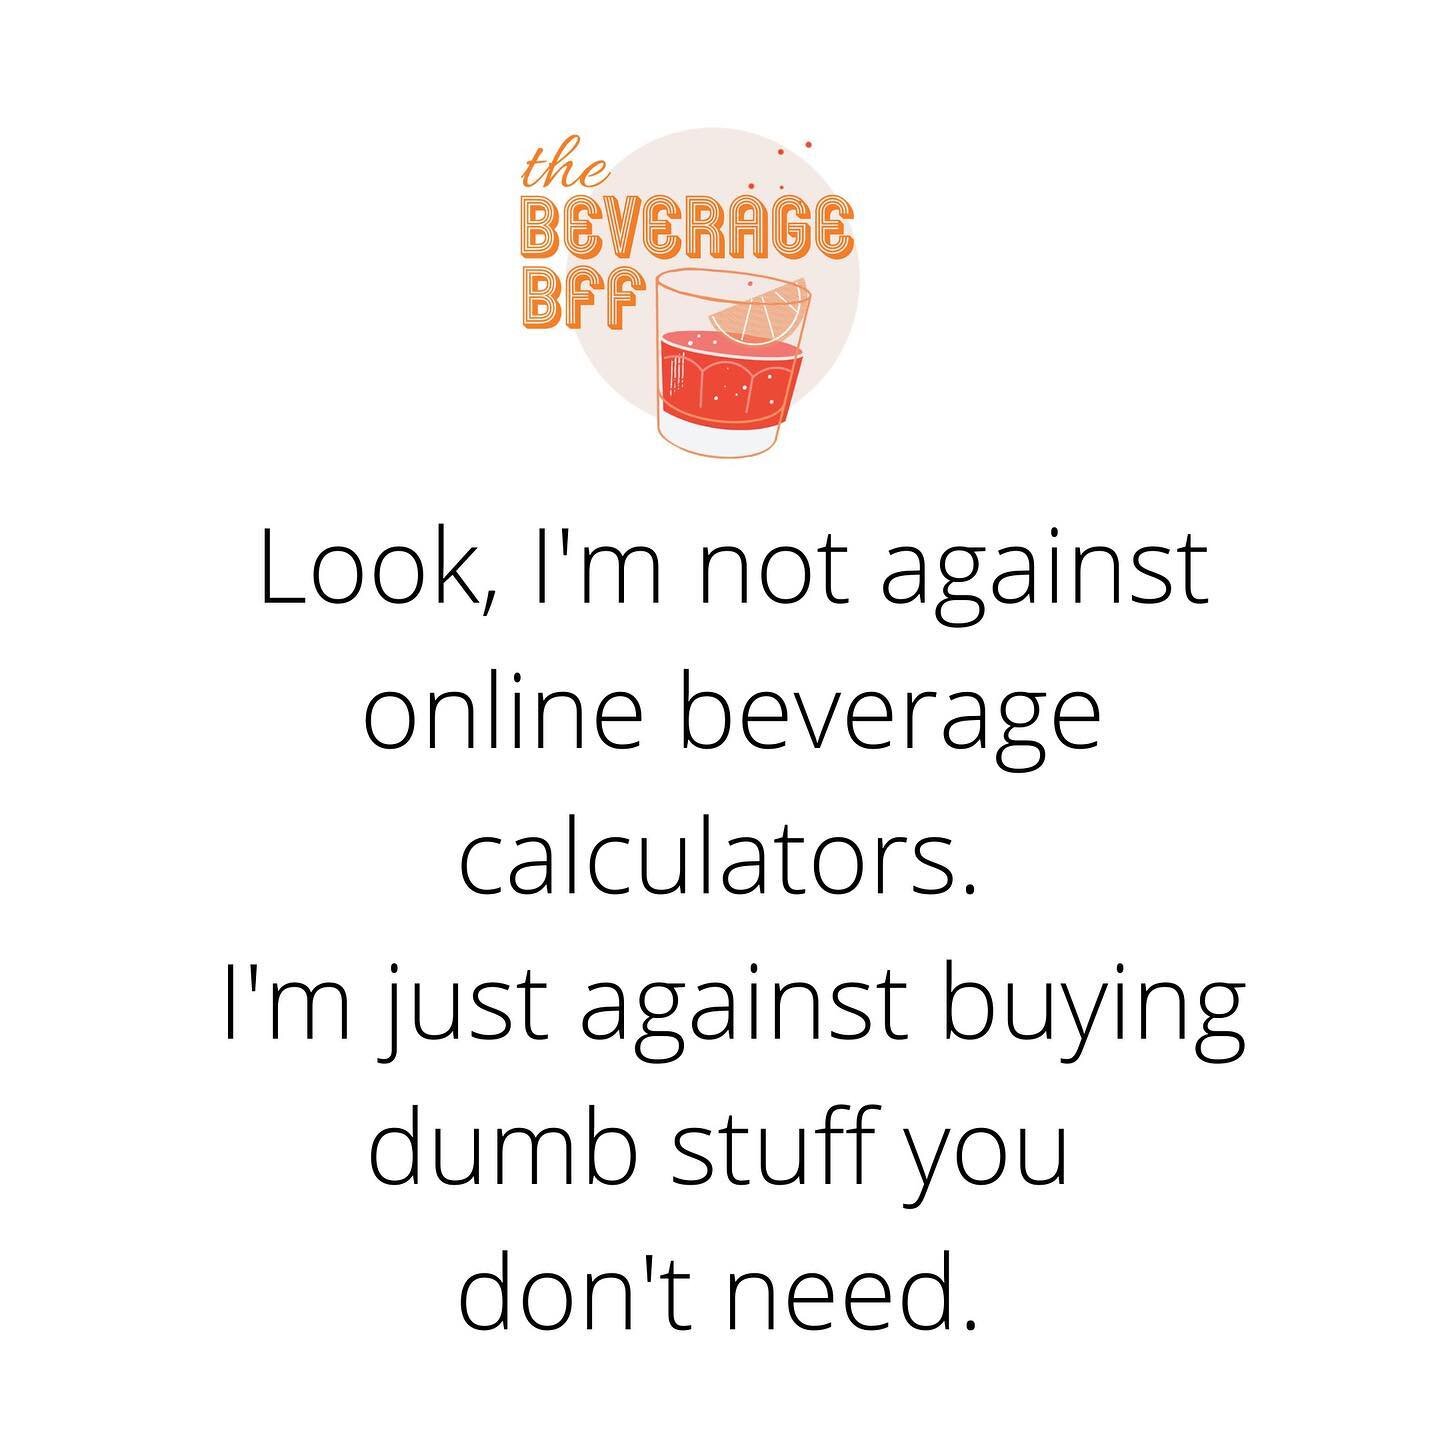 A beverage calculator is just that. A calculator. It&rsquo;s a preset widget that is designed to give you a rough idea of how much alcohol to buy. But, IMO, it only confuses people more.
When event planning, you take into consideration all scenarios-